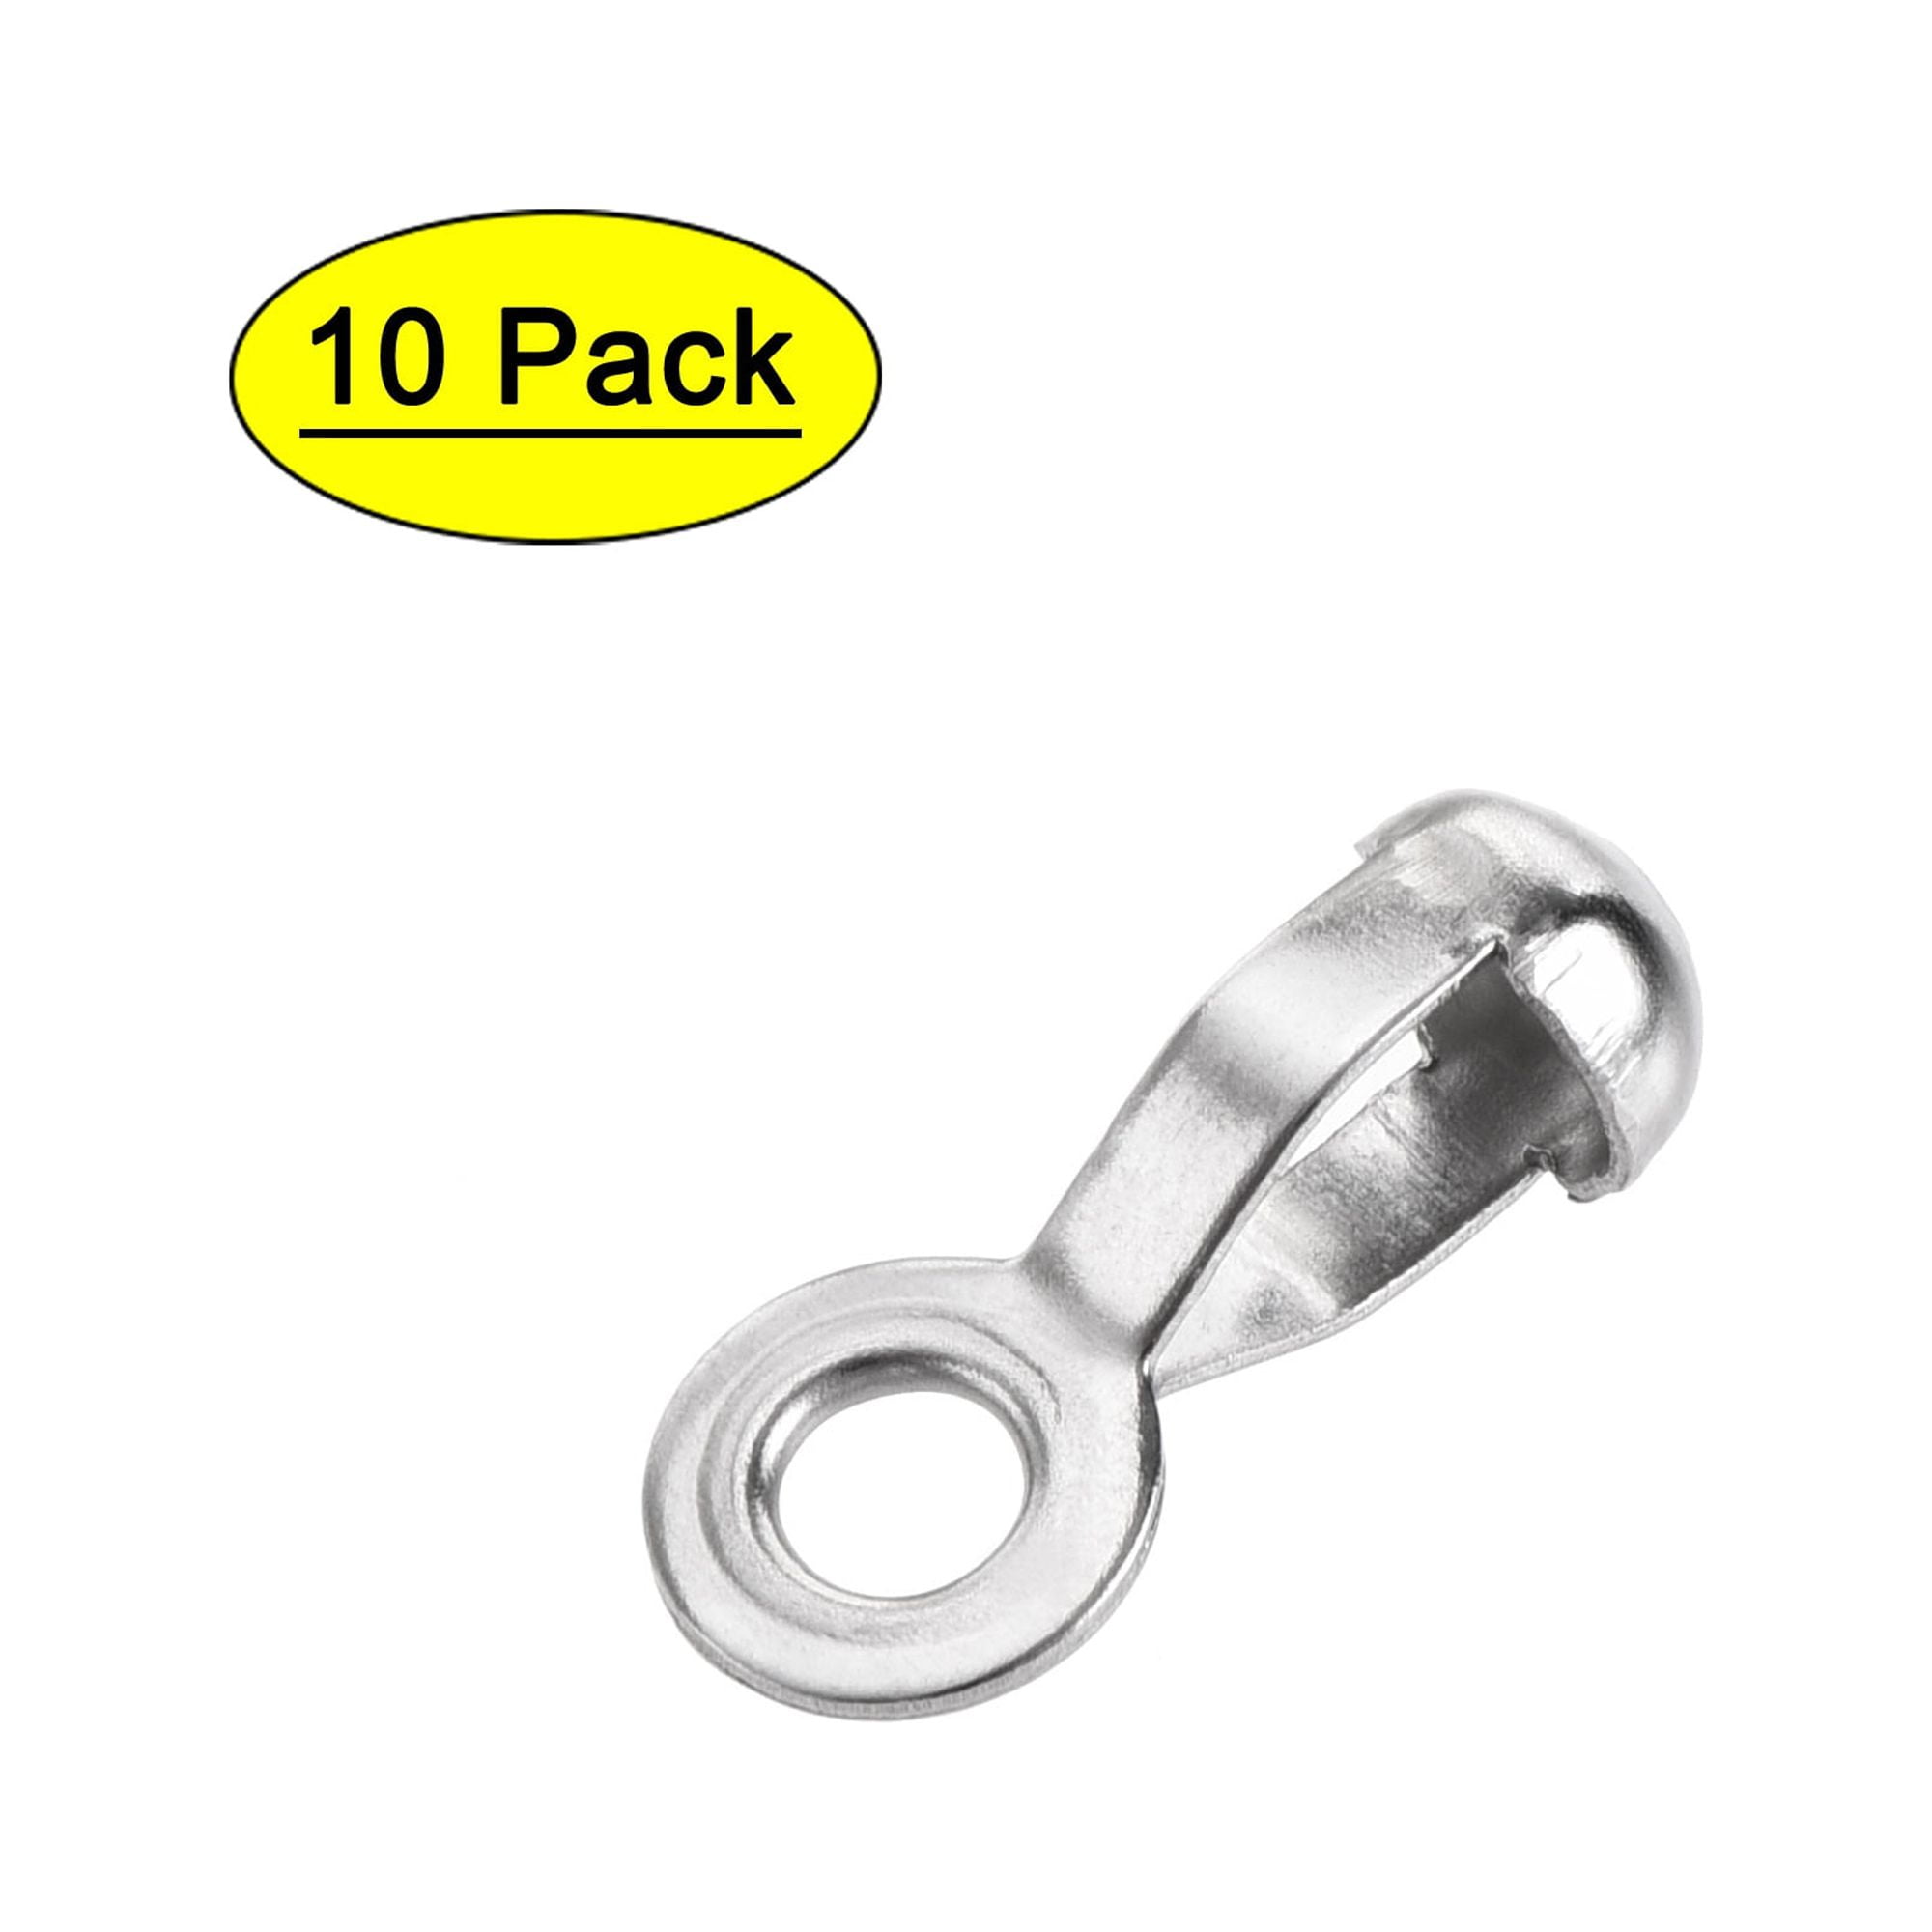 5 or 10 Large Fancy Silver Stainless Steel Pinch Bails for DIY